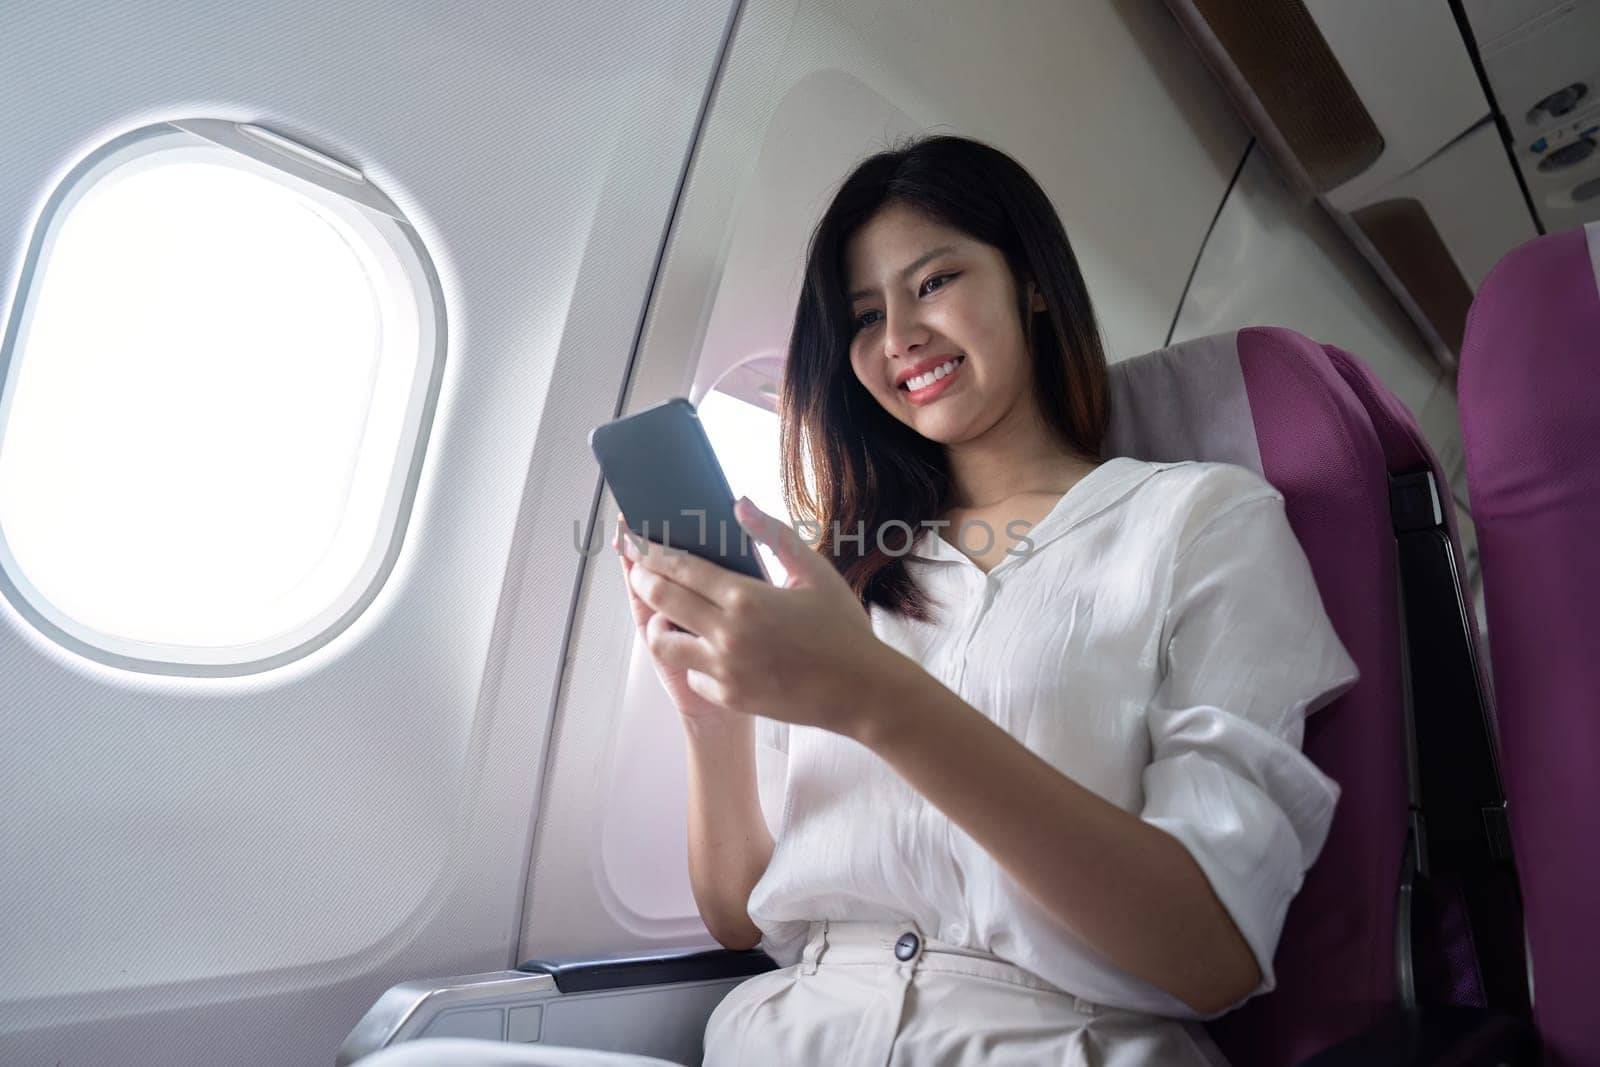 Businesswoman using smartphone in airplane seat. Concept of business travel and digital connectivity.